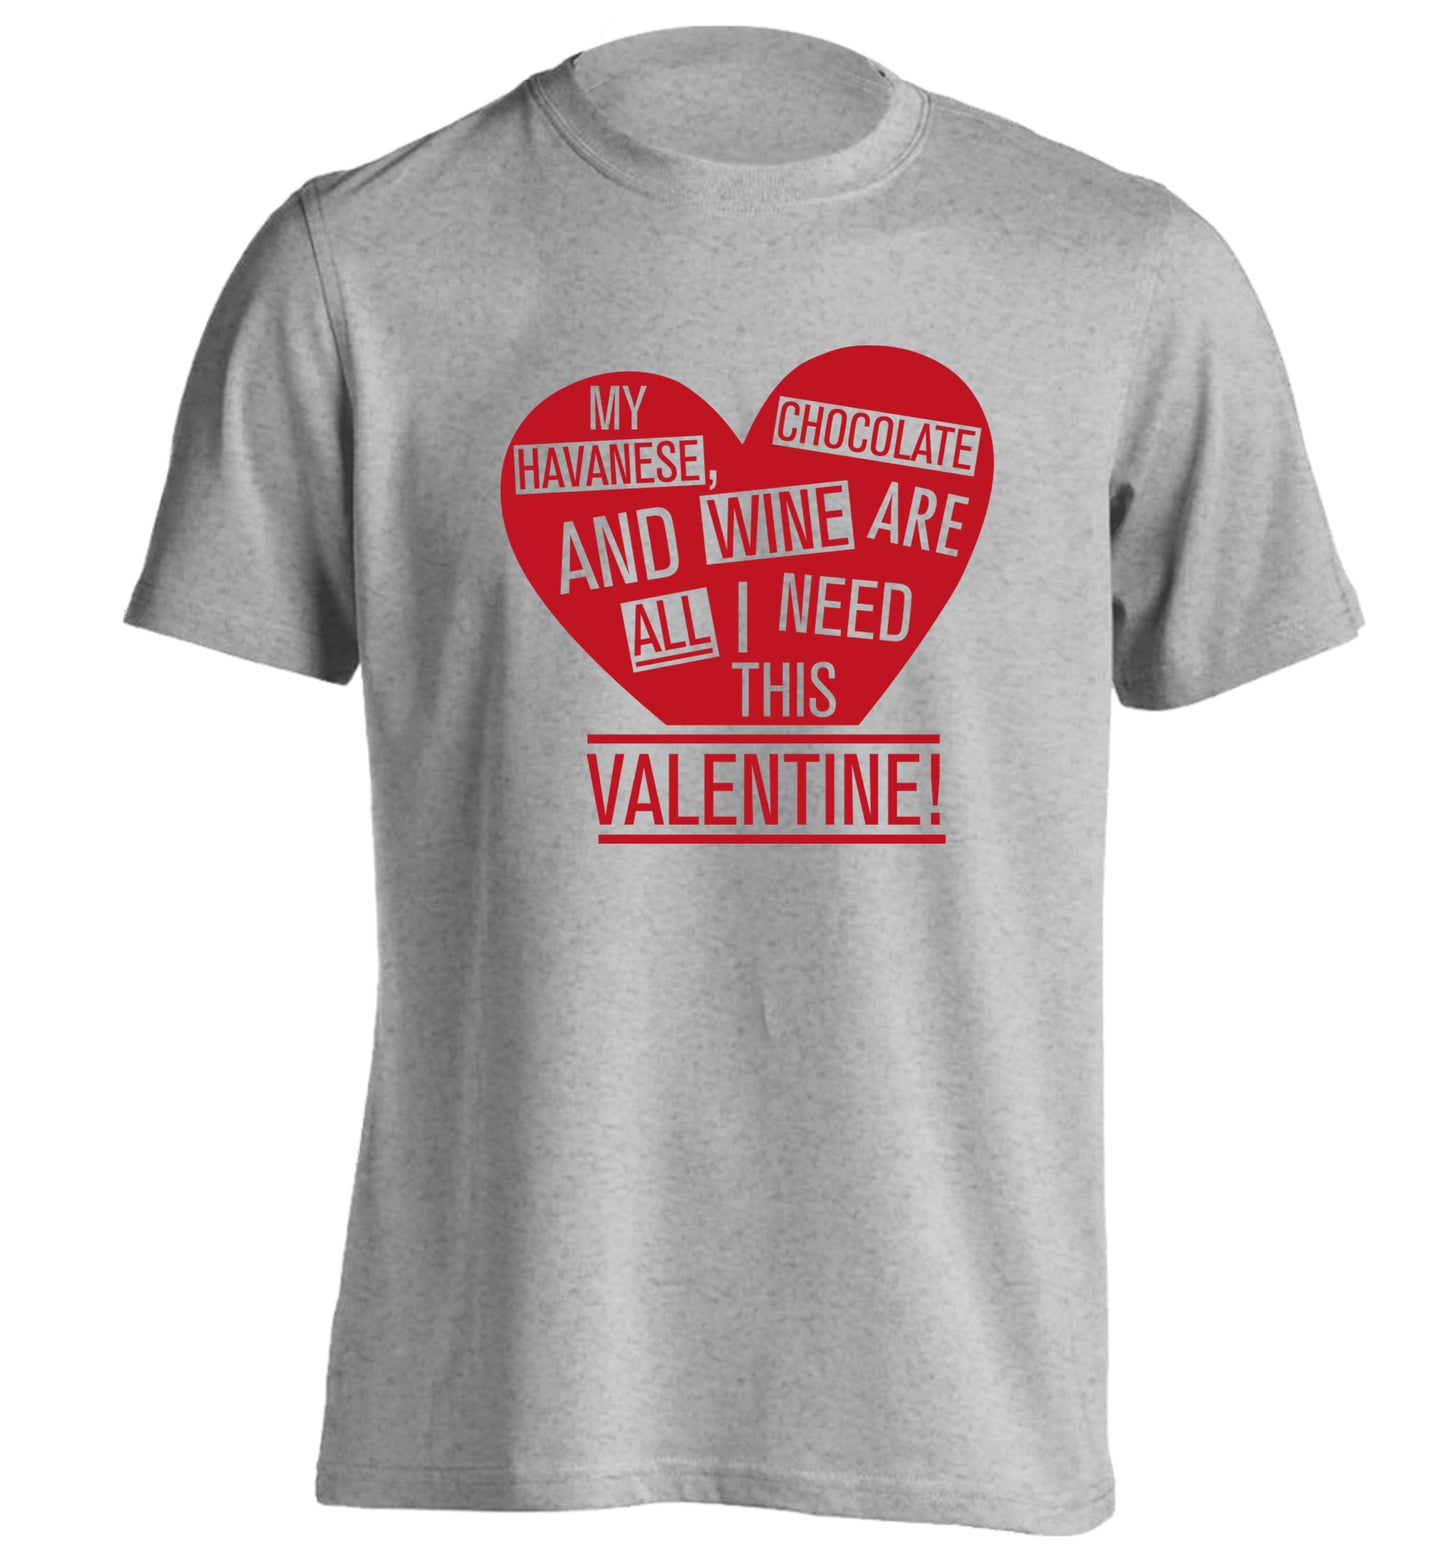 My havanese, chocolate and wine are all I need this valentine! adults unisex grey Tshirt 2XL